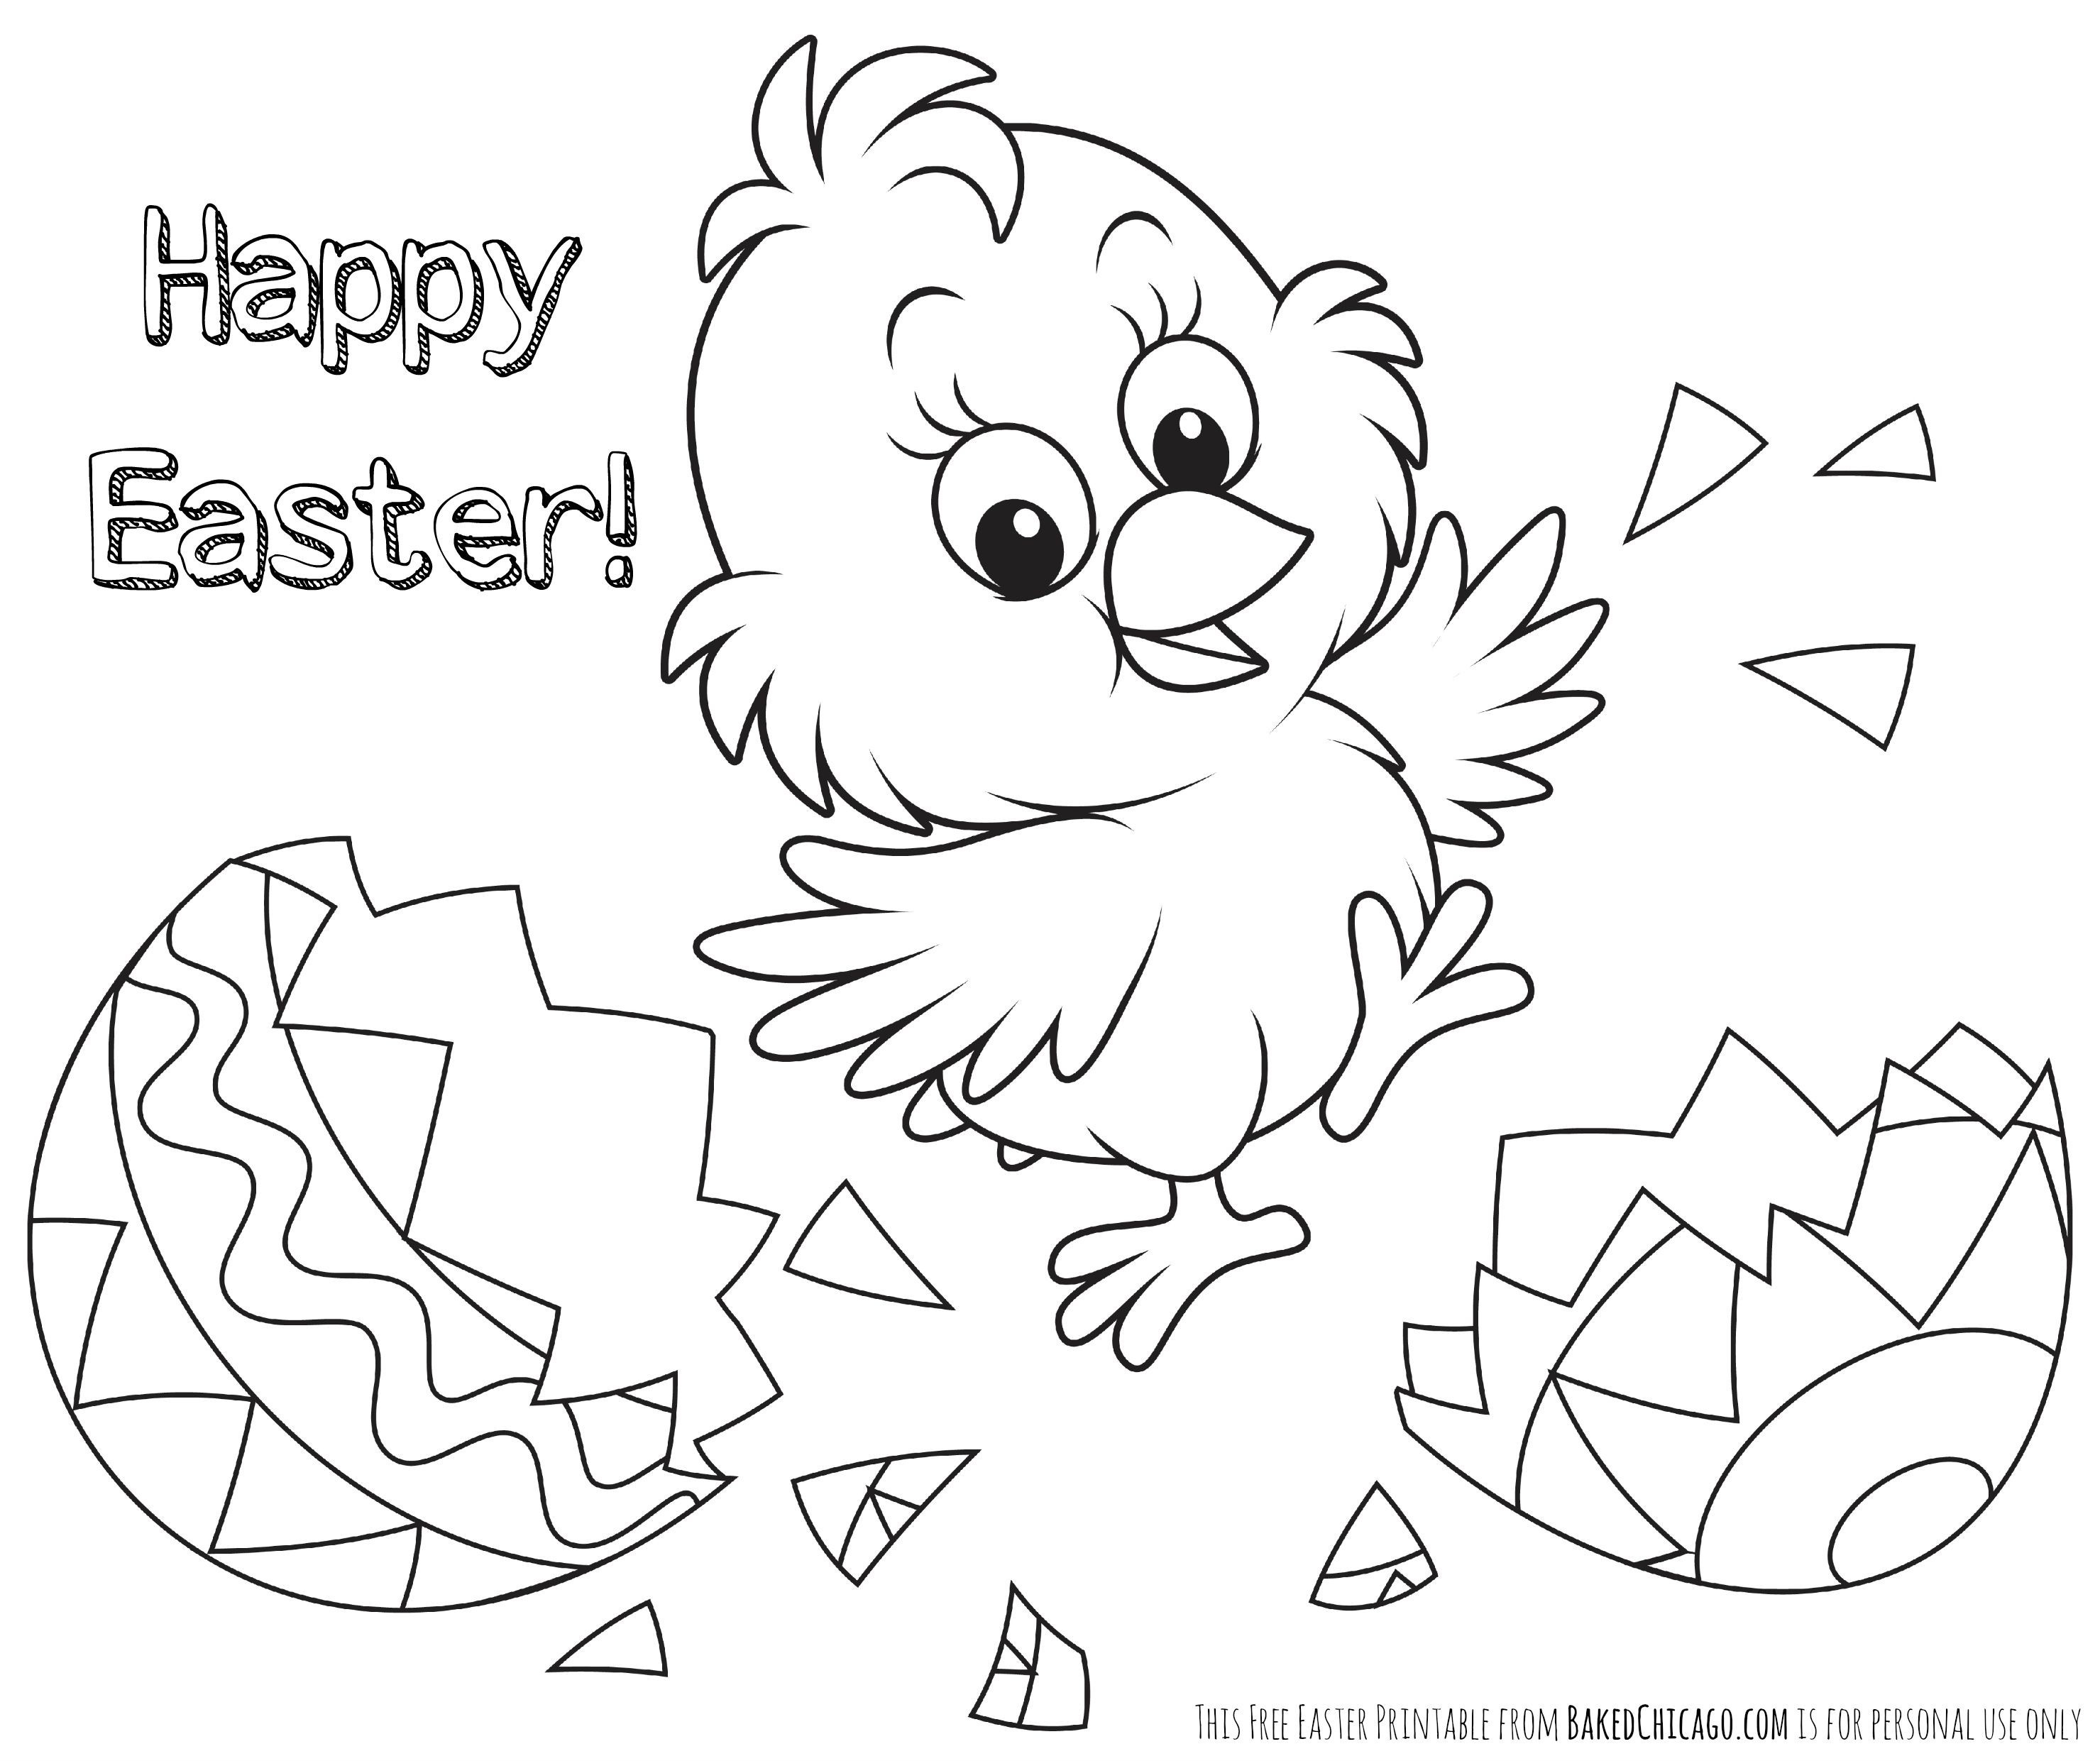 12 Free Printable Easter Coloring Pages | Topsailmultimedia - Free Printable Easter Pages